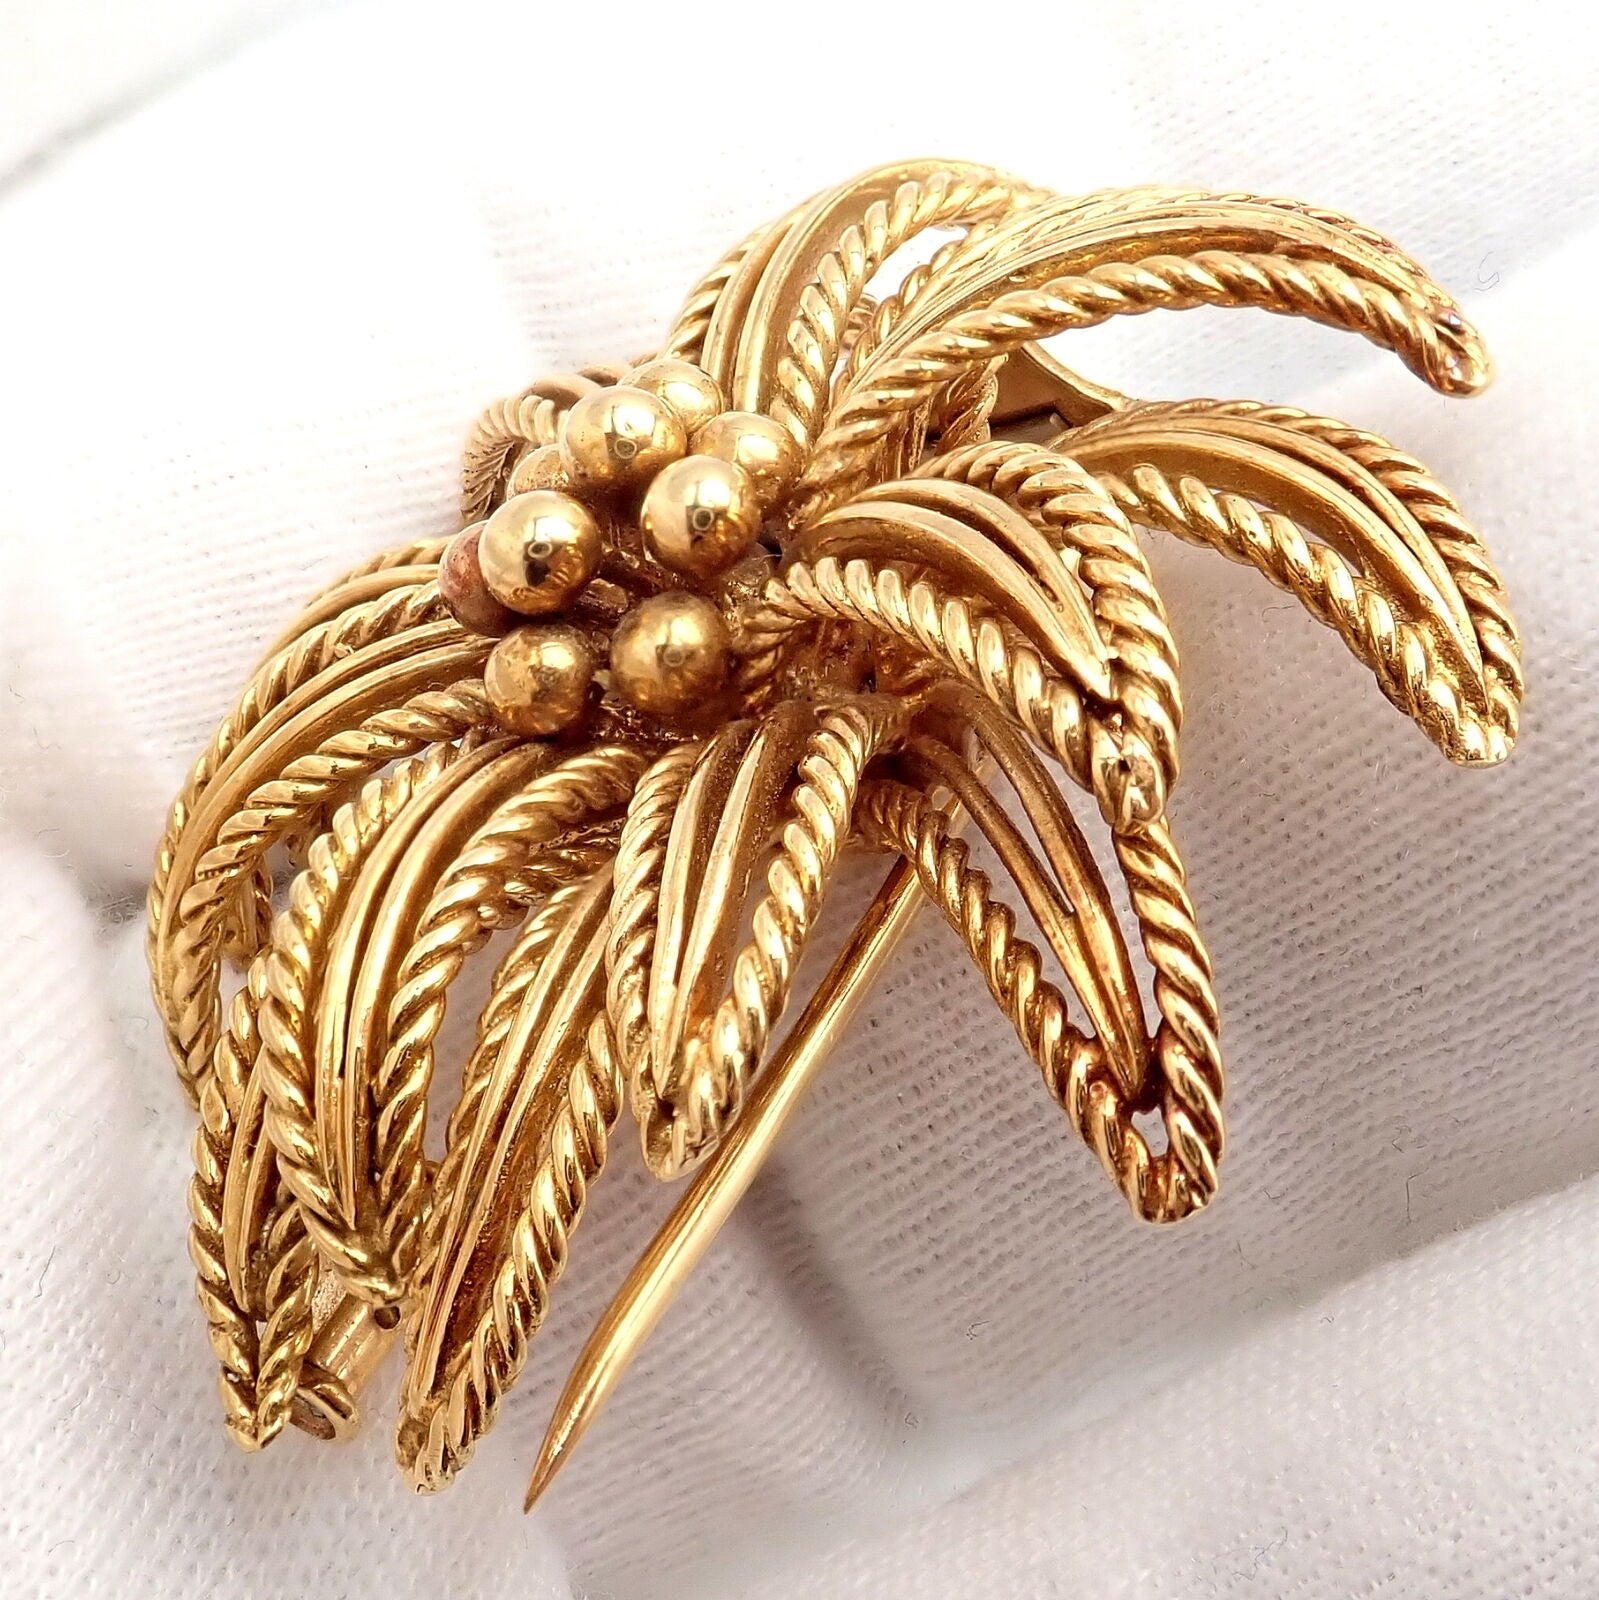 Rare! Authentic Vintage Hermes Paris 18K Yellow Gold Brooch Pin